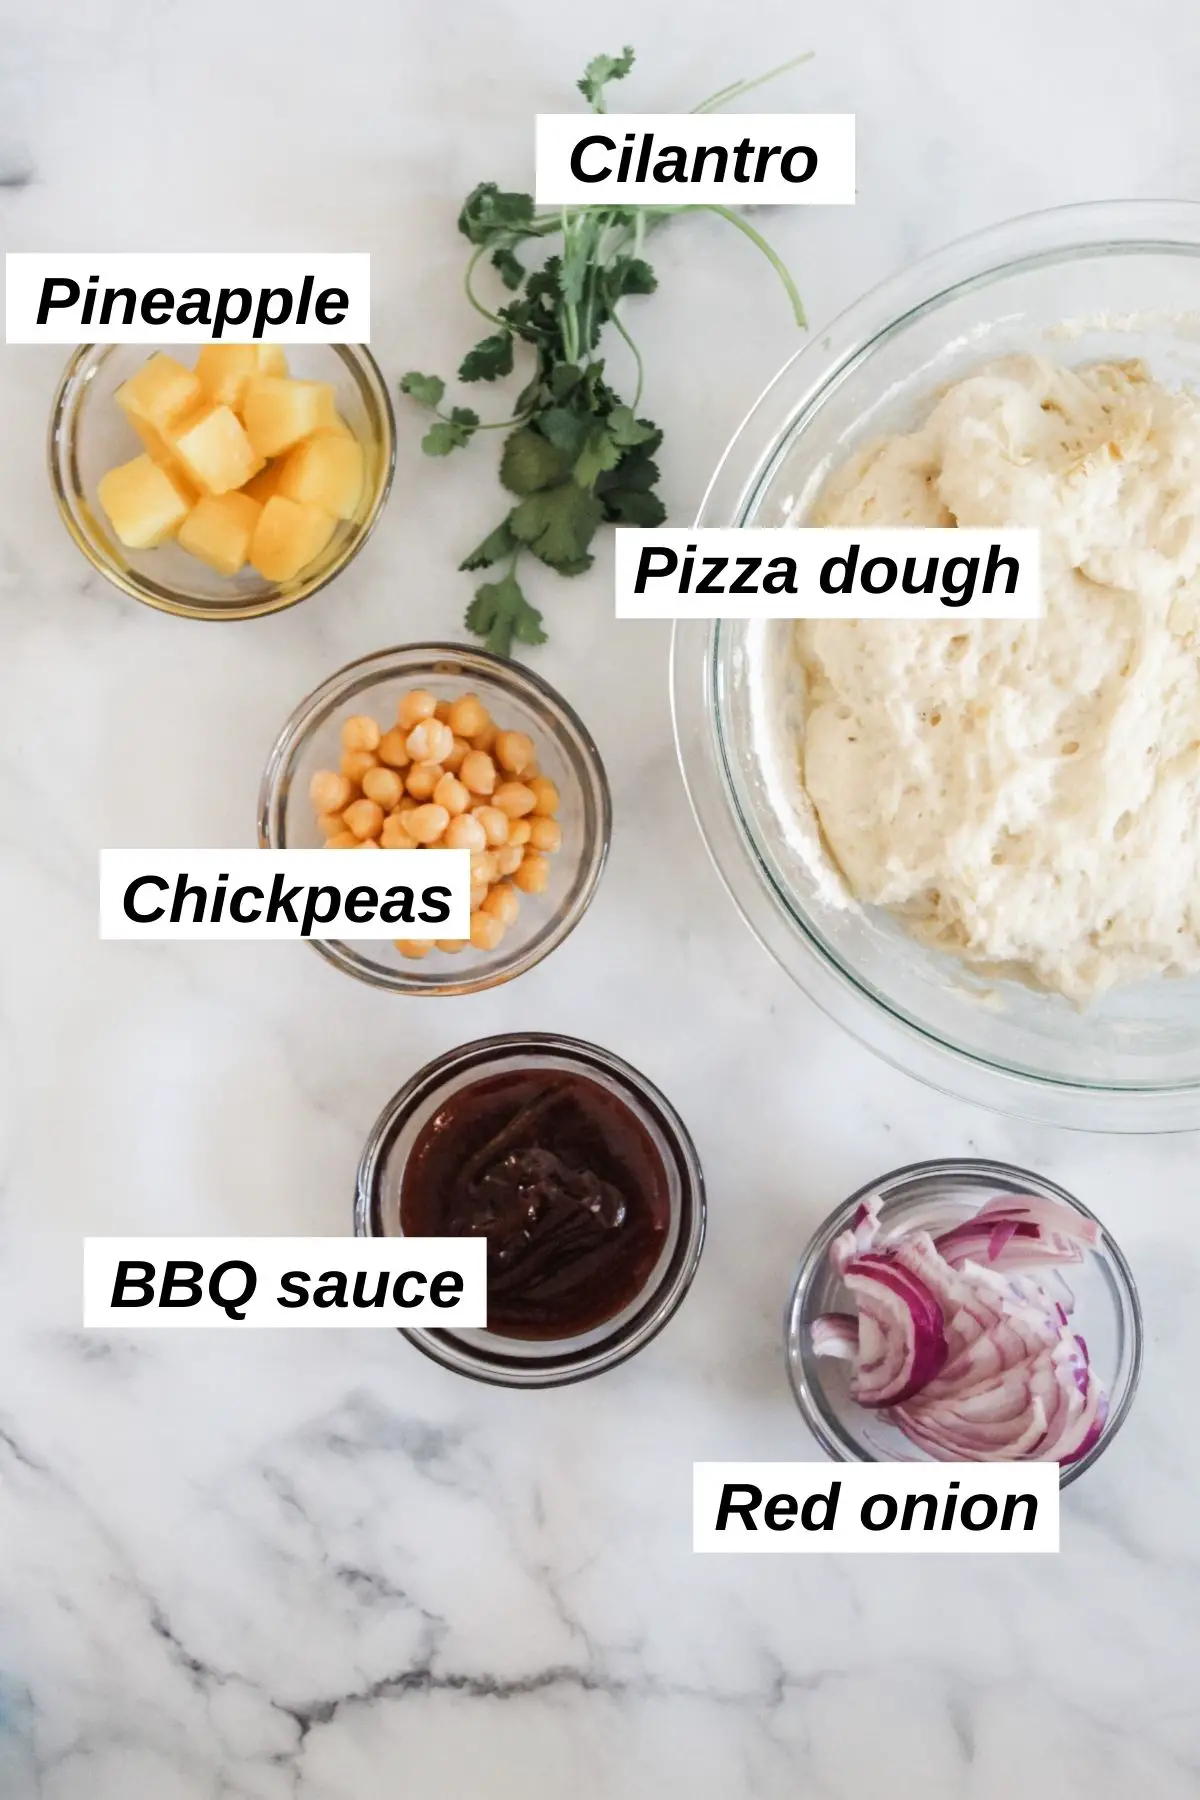 ingredients for vegan bbq pizza in dishes including red onion, pizza dough, cilantro, pineapple, bbq sauce, and chickpeas